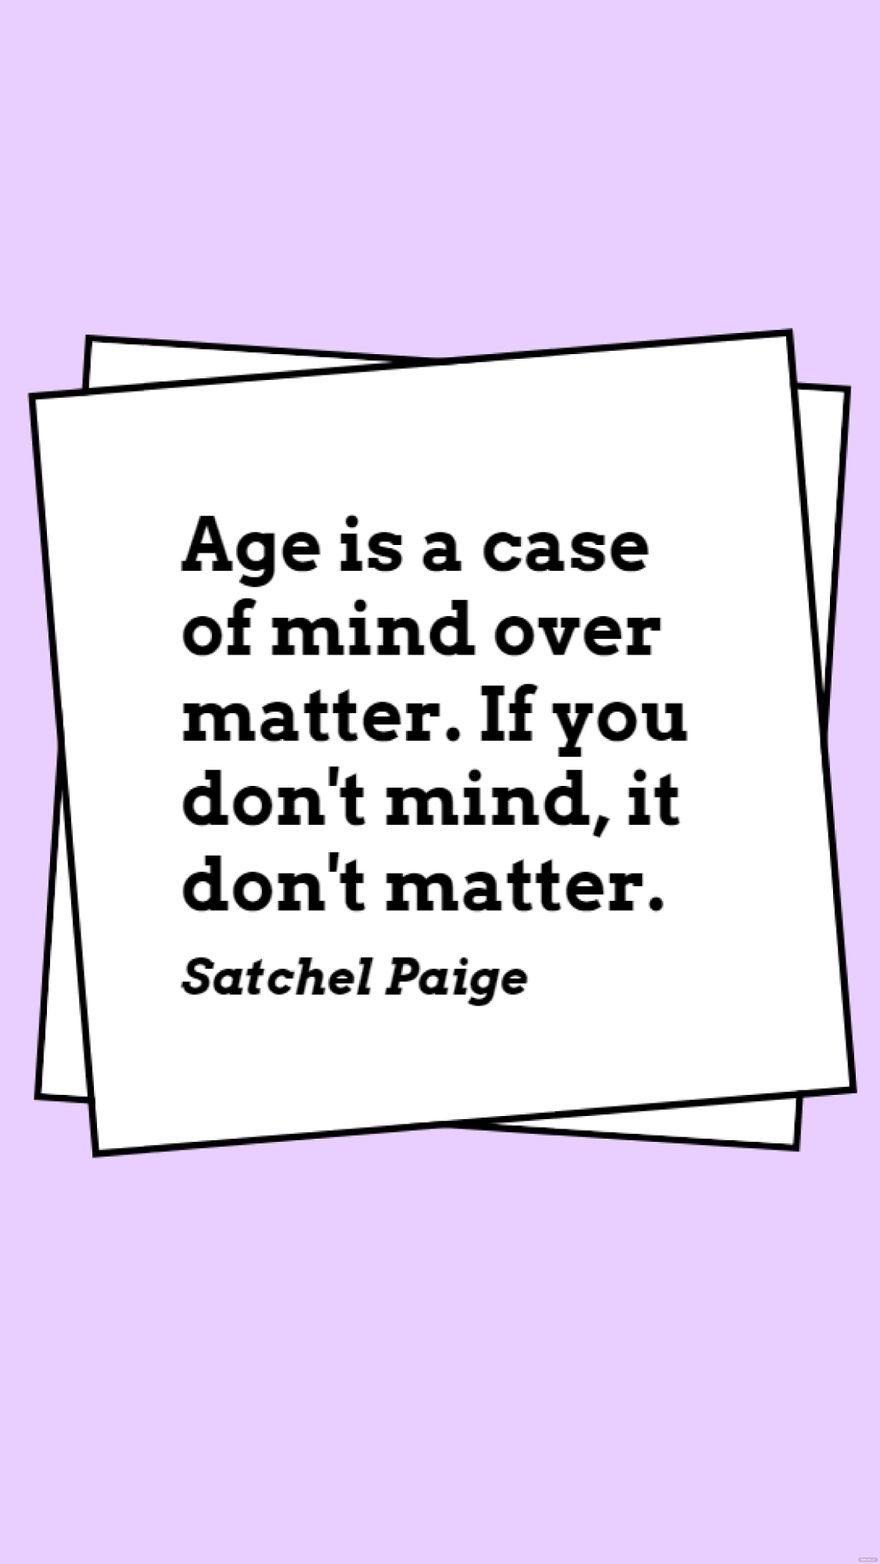 Free Satchel Paige - Age is a case of mind over matter. If you don't mind, it don't matter.